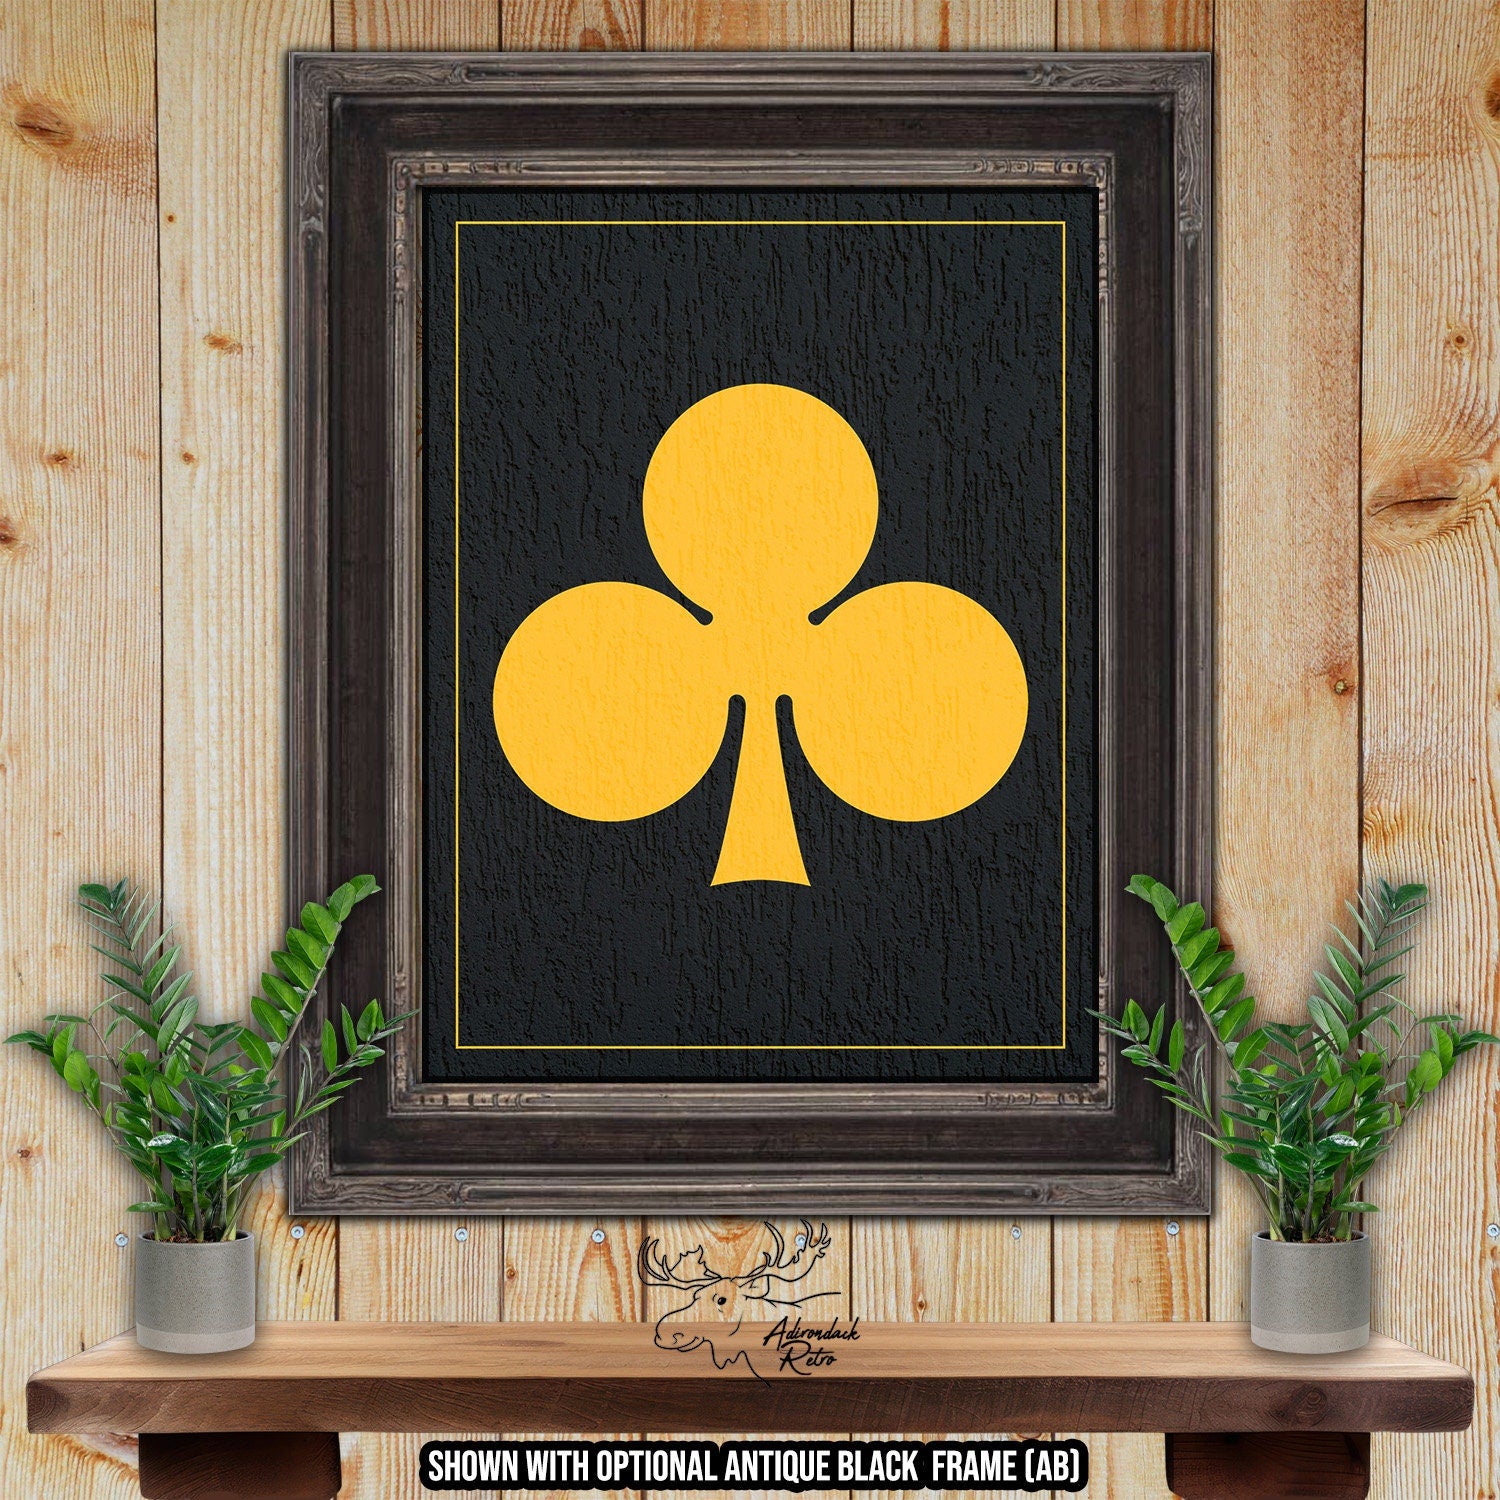 Clubs Playing Card Suit - Black &amp; Gold Fine Art Print at Adirondack Retro